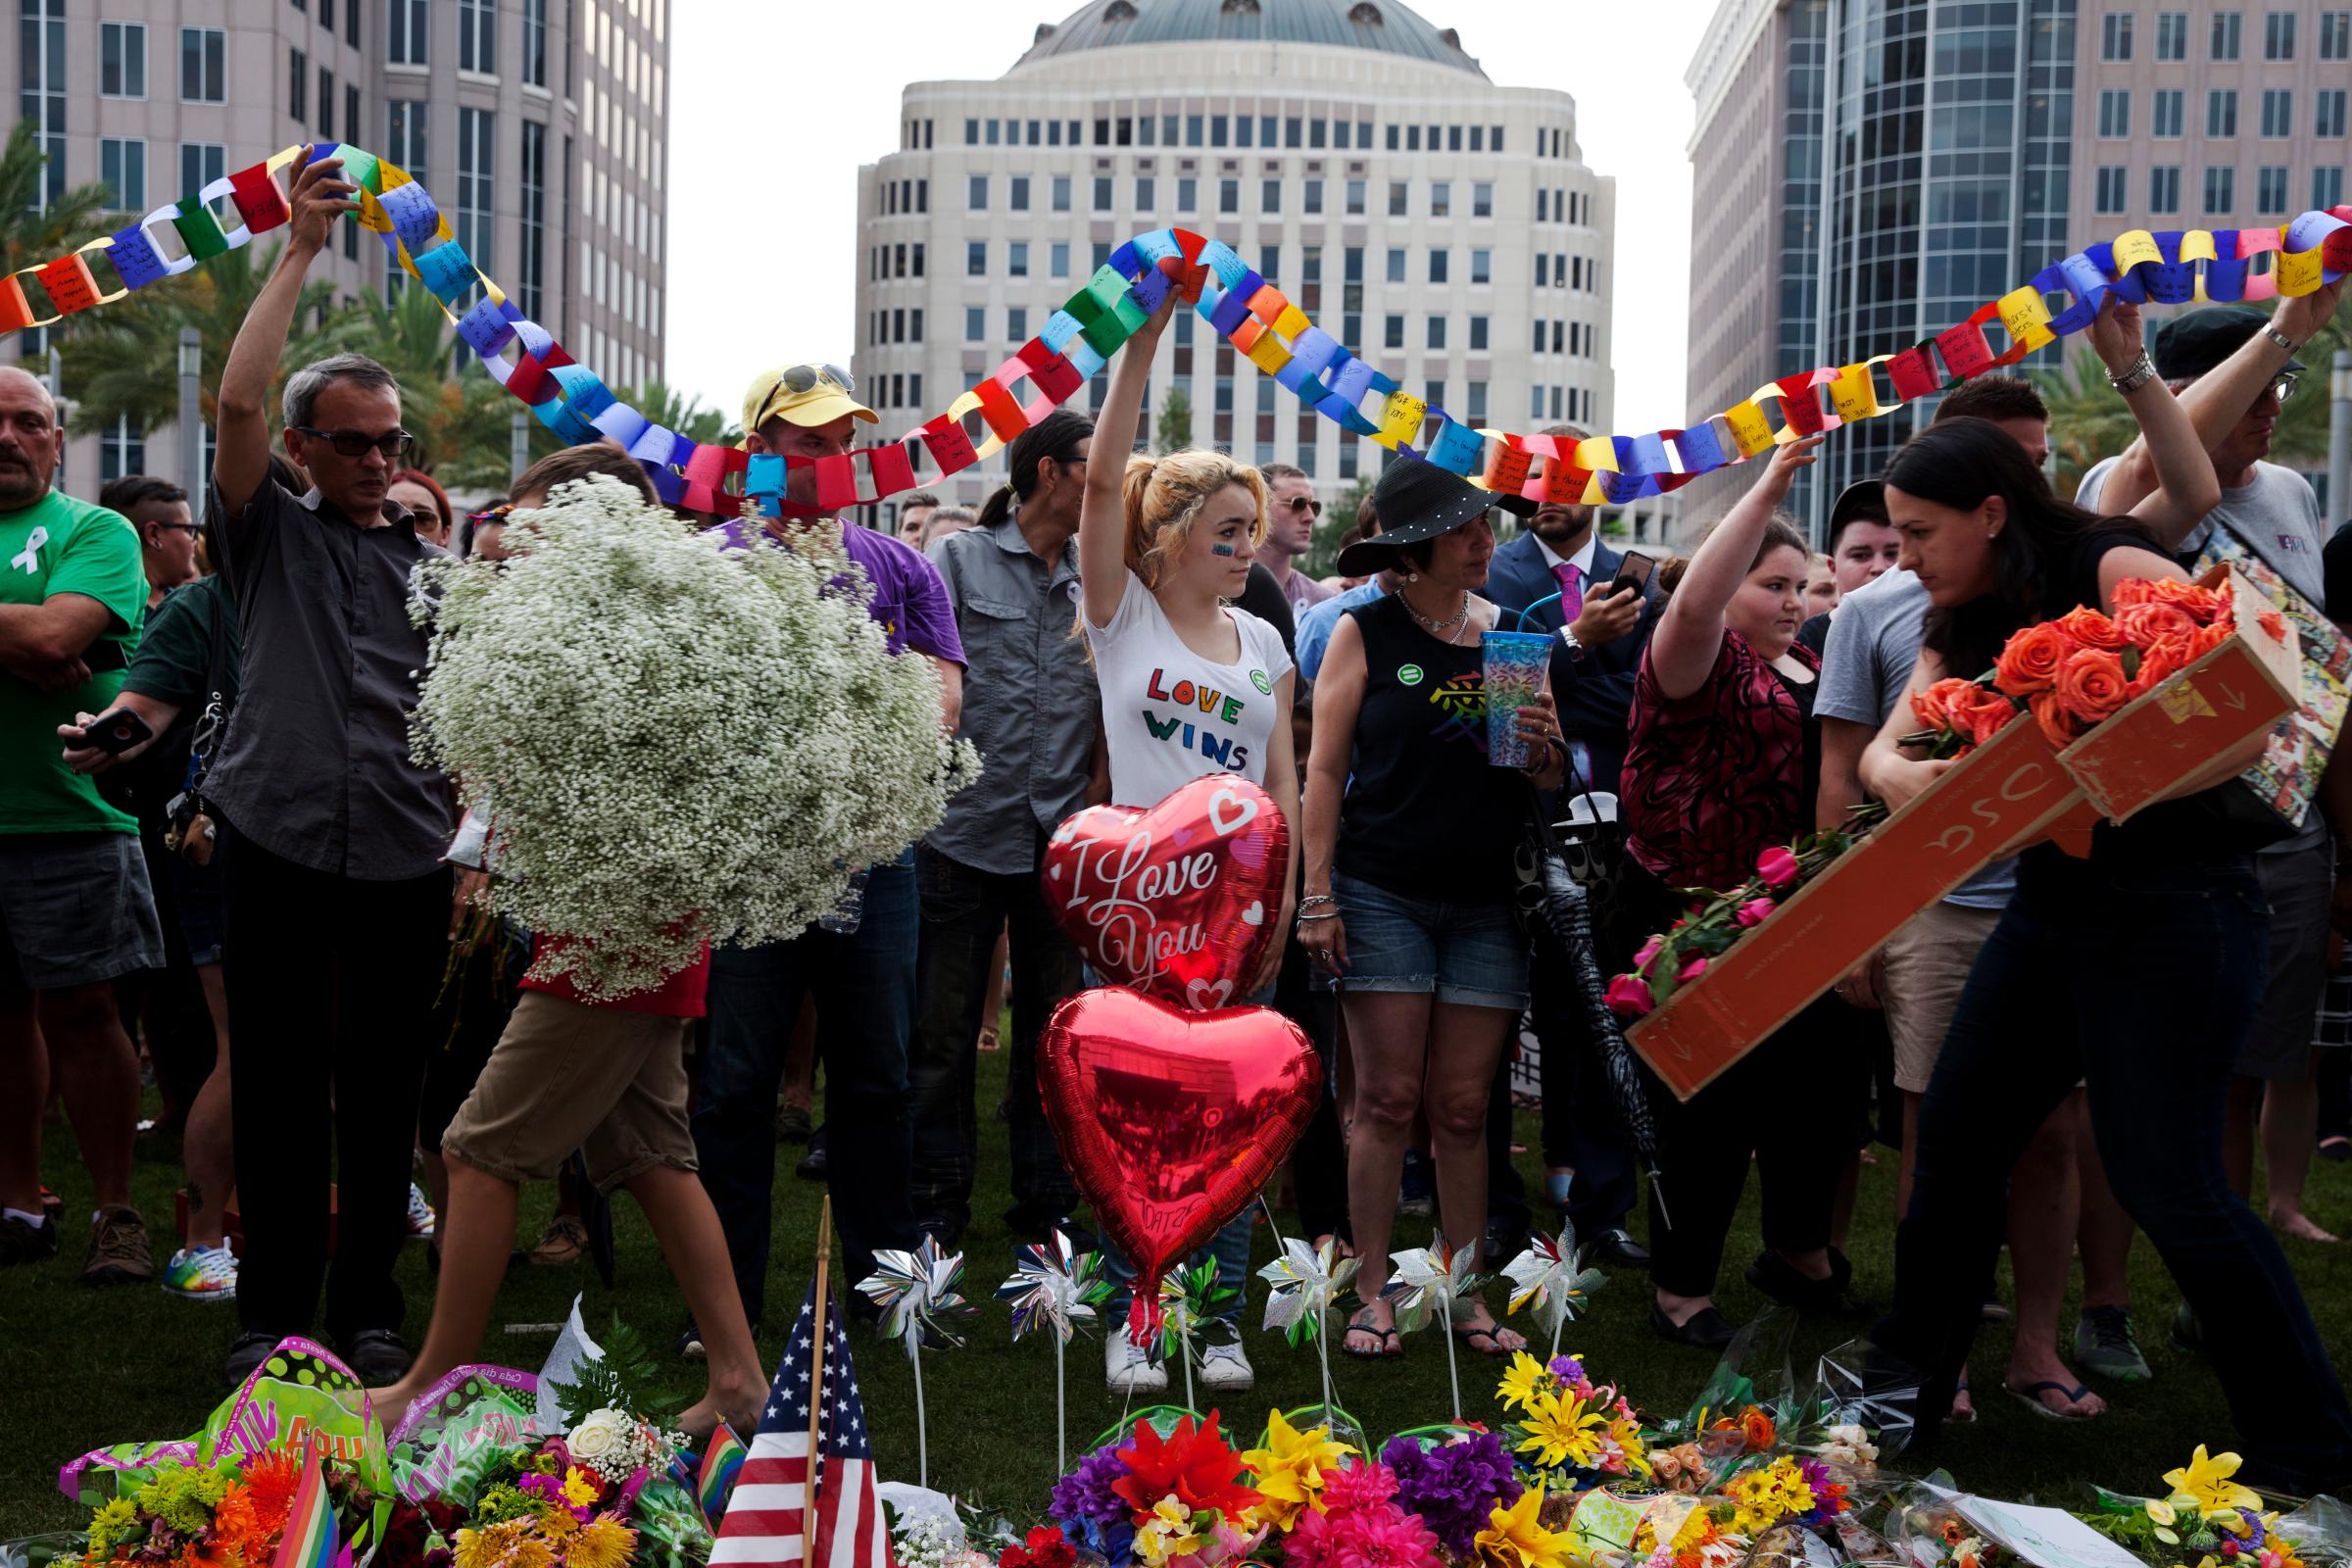 A memorial honors victims of the Pulse nightclub shooting at the Dr. Phillips Center for Performing Arts in Orlando, Fla., on June 13, 2016.